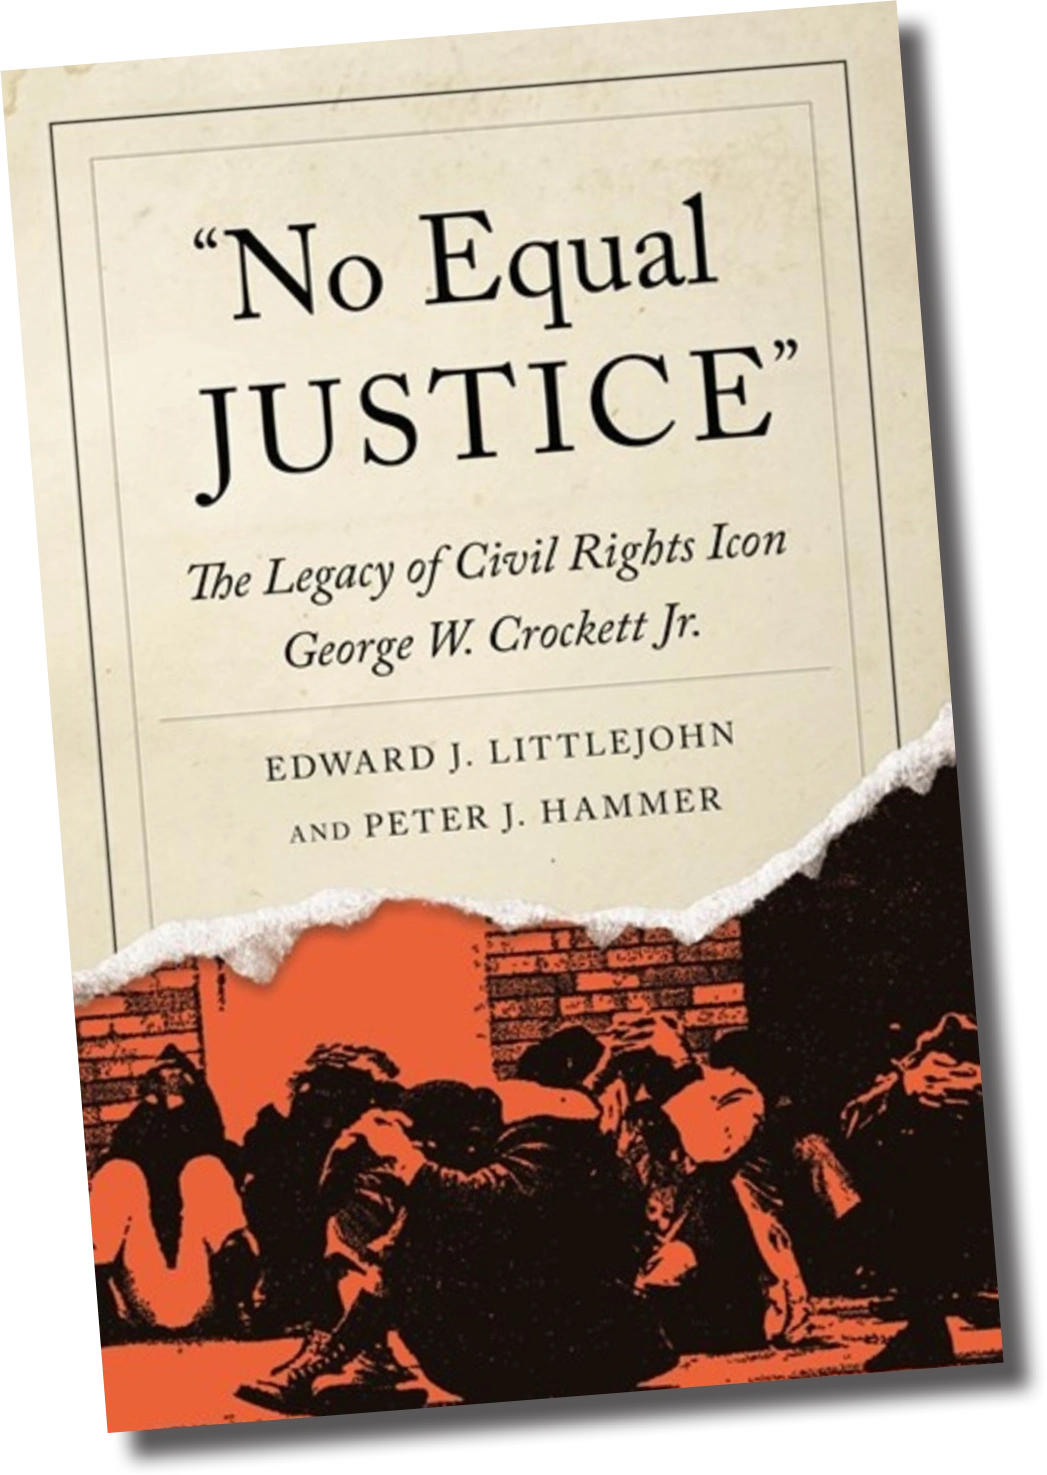 "No Equal Justice" The Legacy of Civil Rights Icon George W. Crockett Jr. book cover